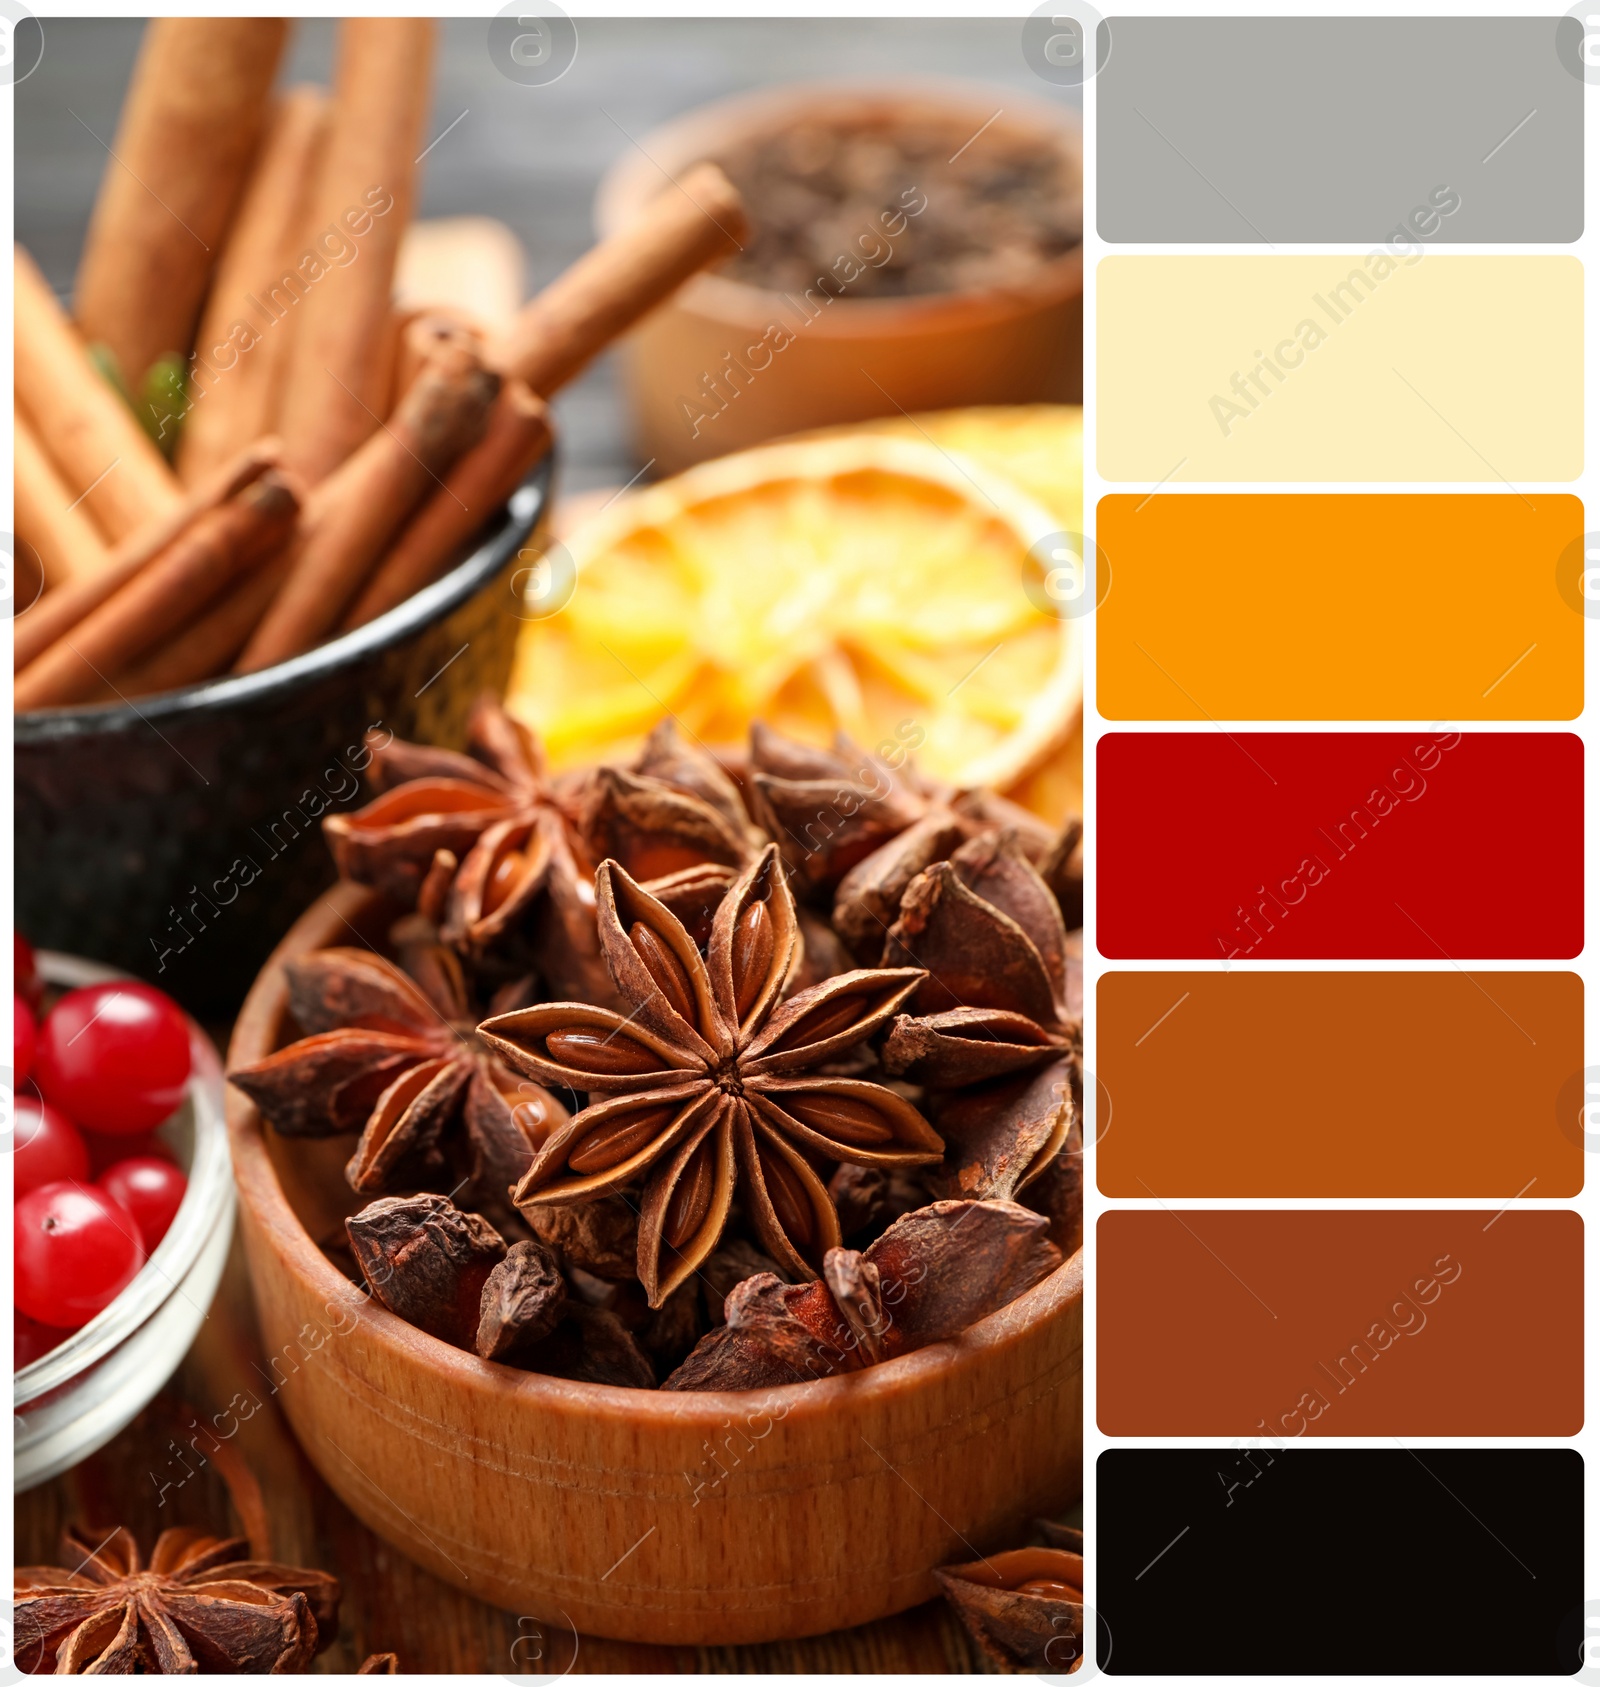 Image of Different mulled wine ingredients on table and color palette. Collage